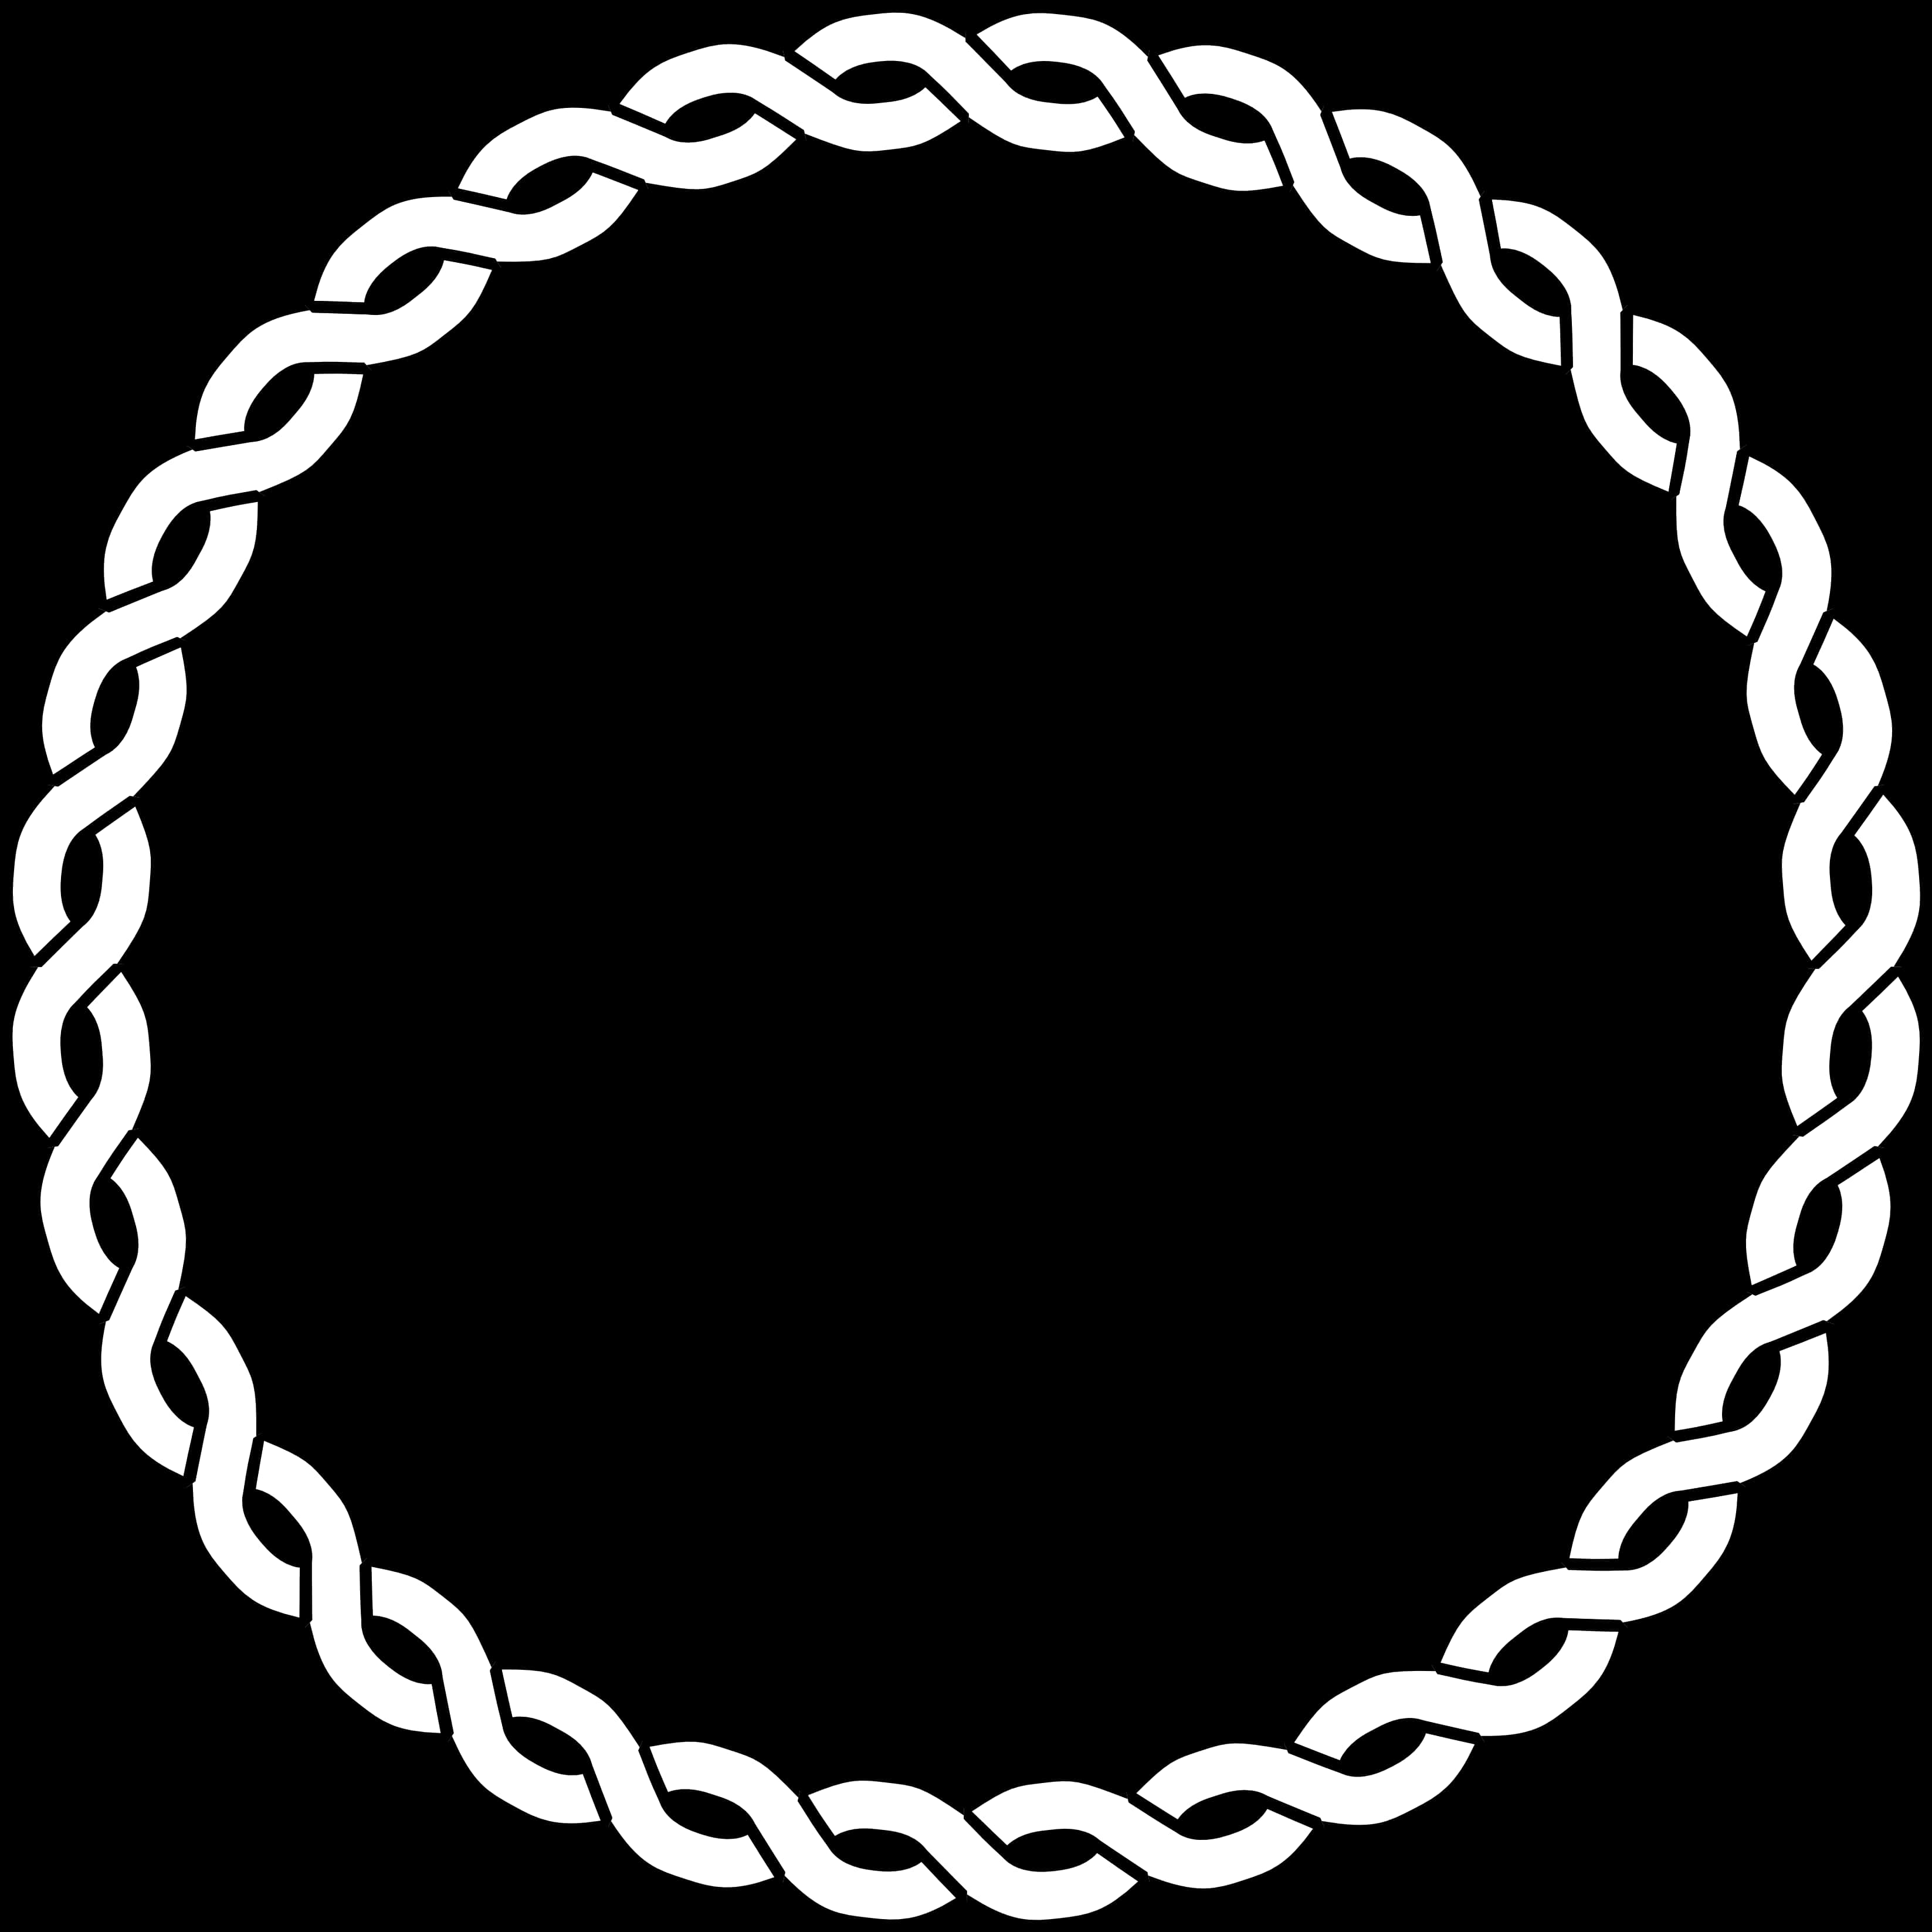 White Chain Circle Graphic PNG image